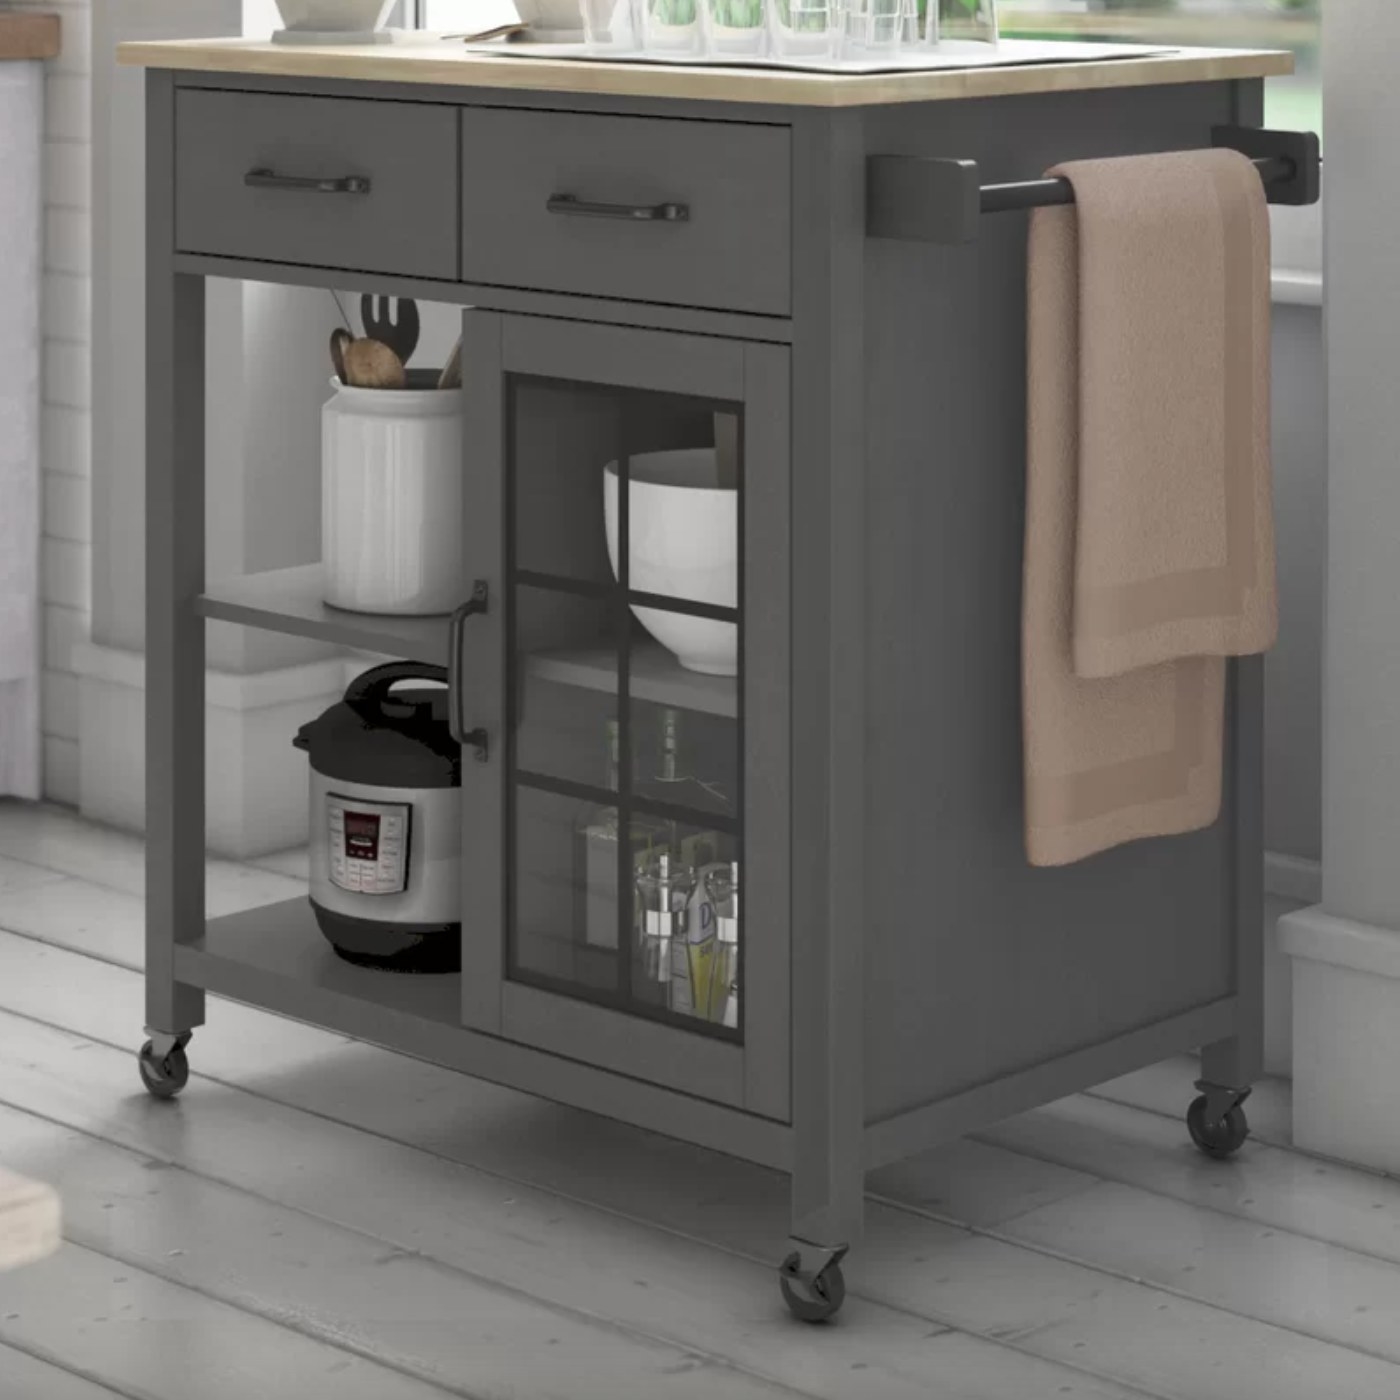 The kitchen cart in gray